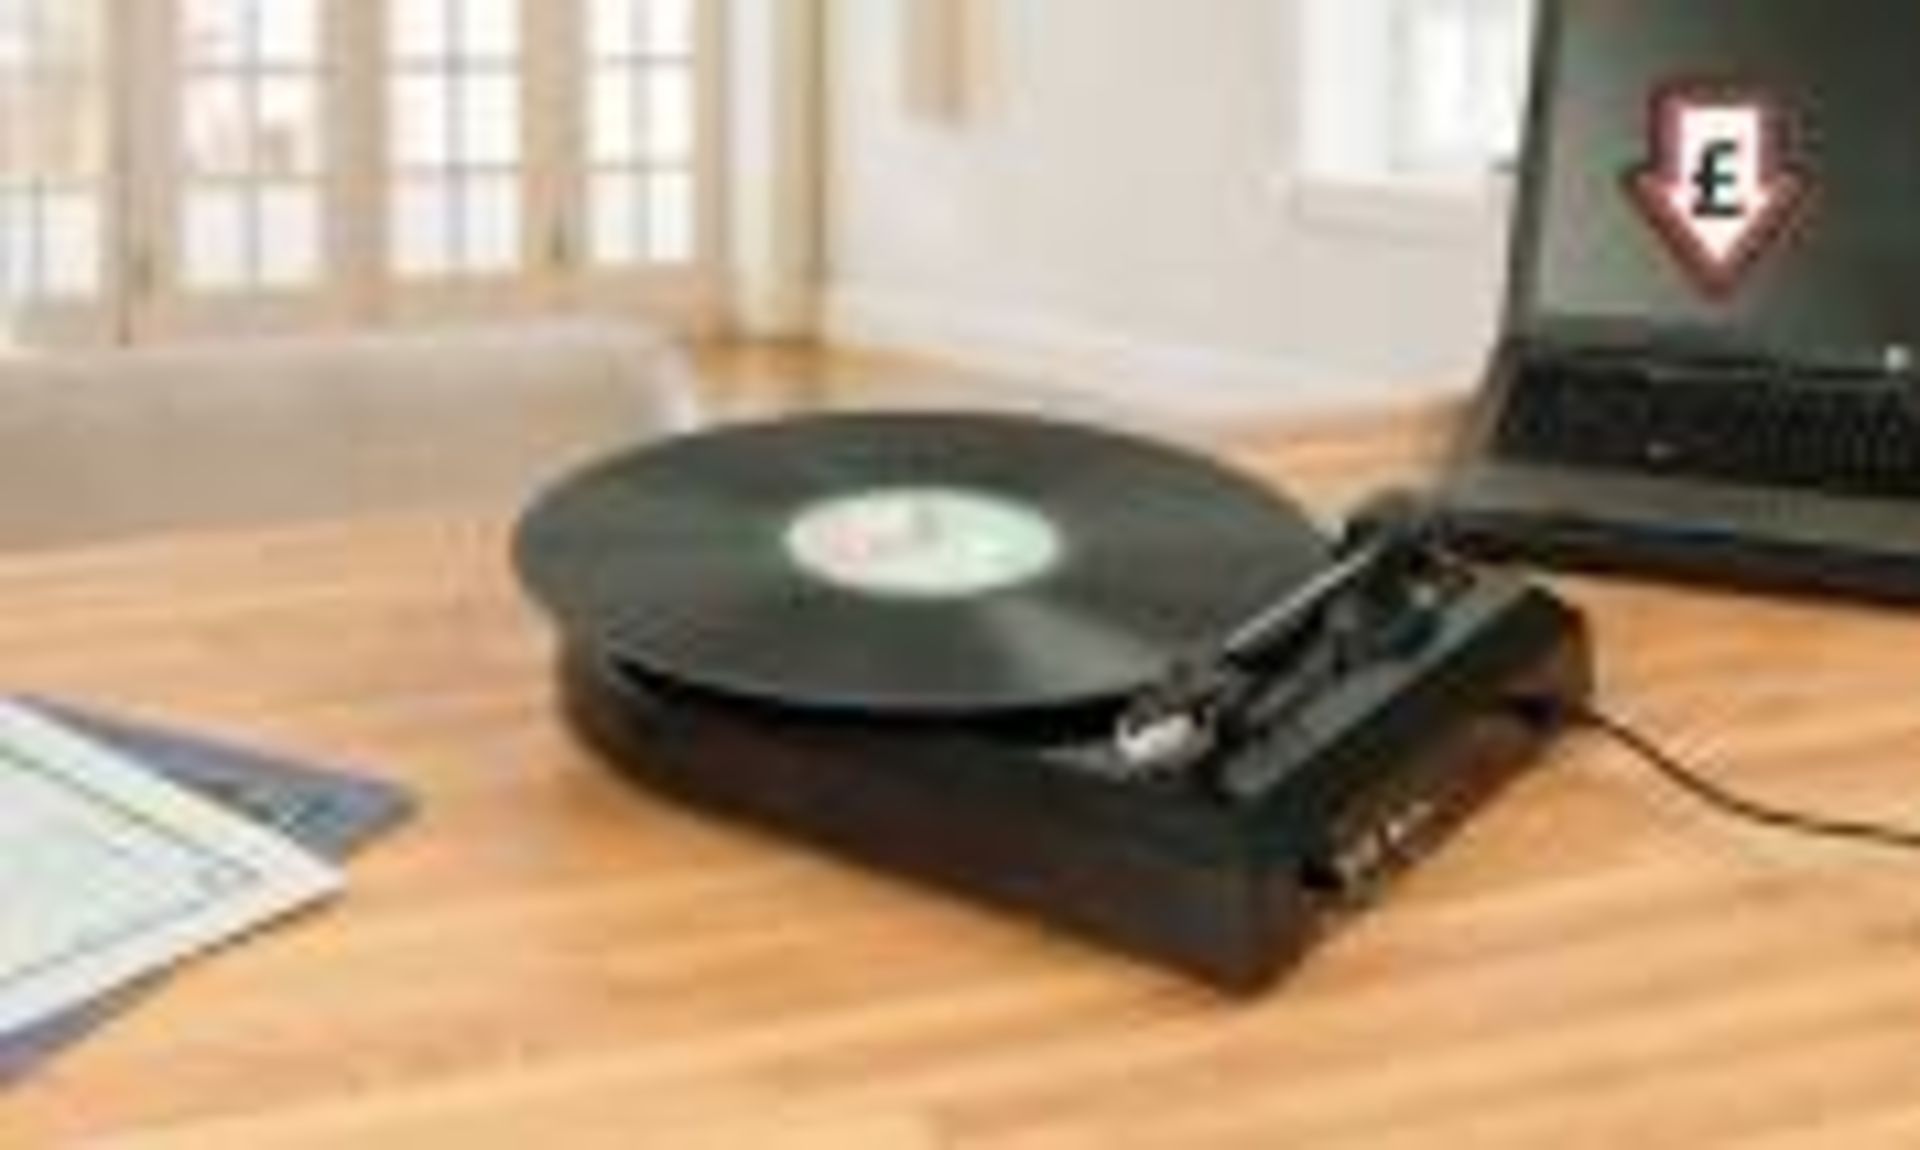 V *TRADE QTY* Brand New Zennox USB Turntable With Built In Speaker With Volume Control Convert LP